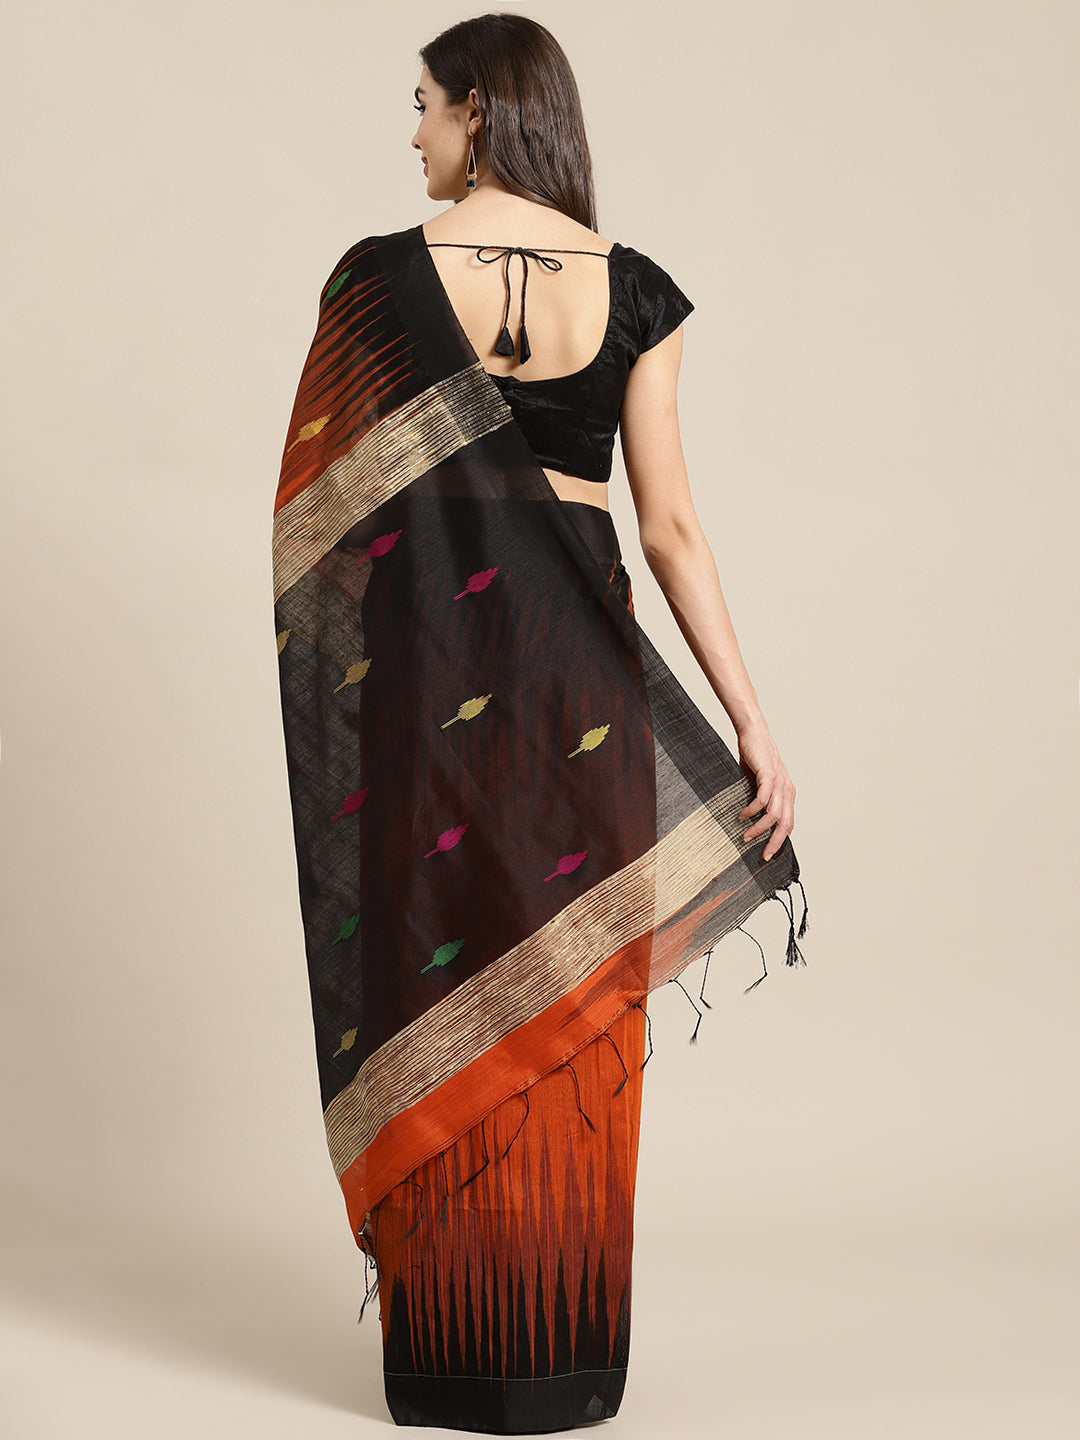 Orange and , Kalakari India Ikat Silk Cotton Woven Design Saree with Blouse SHBESA0049-Saree-Kalakari India-SHBESA0049-Bengal, Cotton, Geographical Indication, Hand Crafted, Heritage Prints, Ikkat, Natural Dyes, Red, Sarees, Sustainable Fabrics, Woven, Yellow-[Linen,Ethnic,wear,Fashionista,Handloom,Handicraft,Indigo,blockprint,block,print,Cotton,Chanderi,Blue, latest,classy,party,bollywood,trendy,summer,style,traditional,formal,elegant,unique,style,hand,block,print, dabu,booti,gift,present,glamo